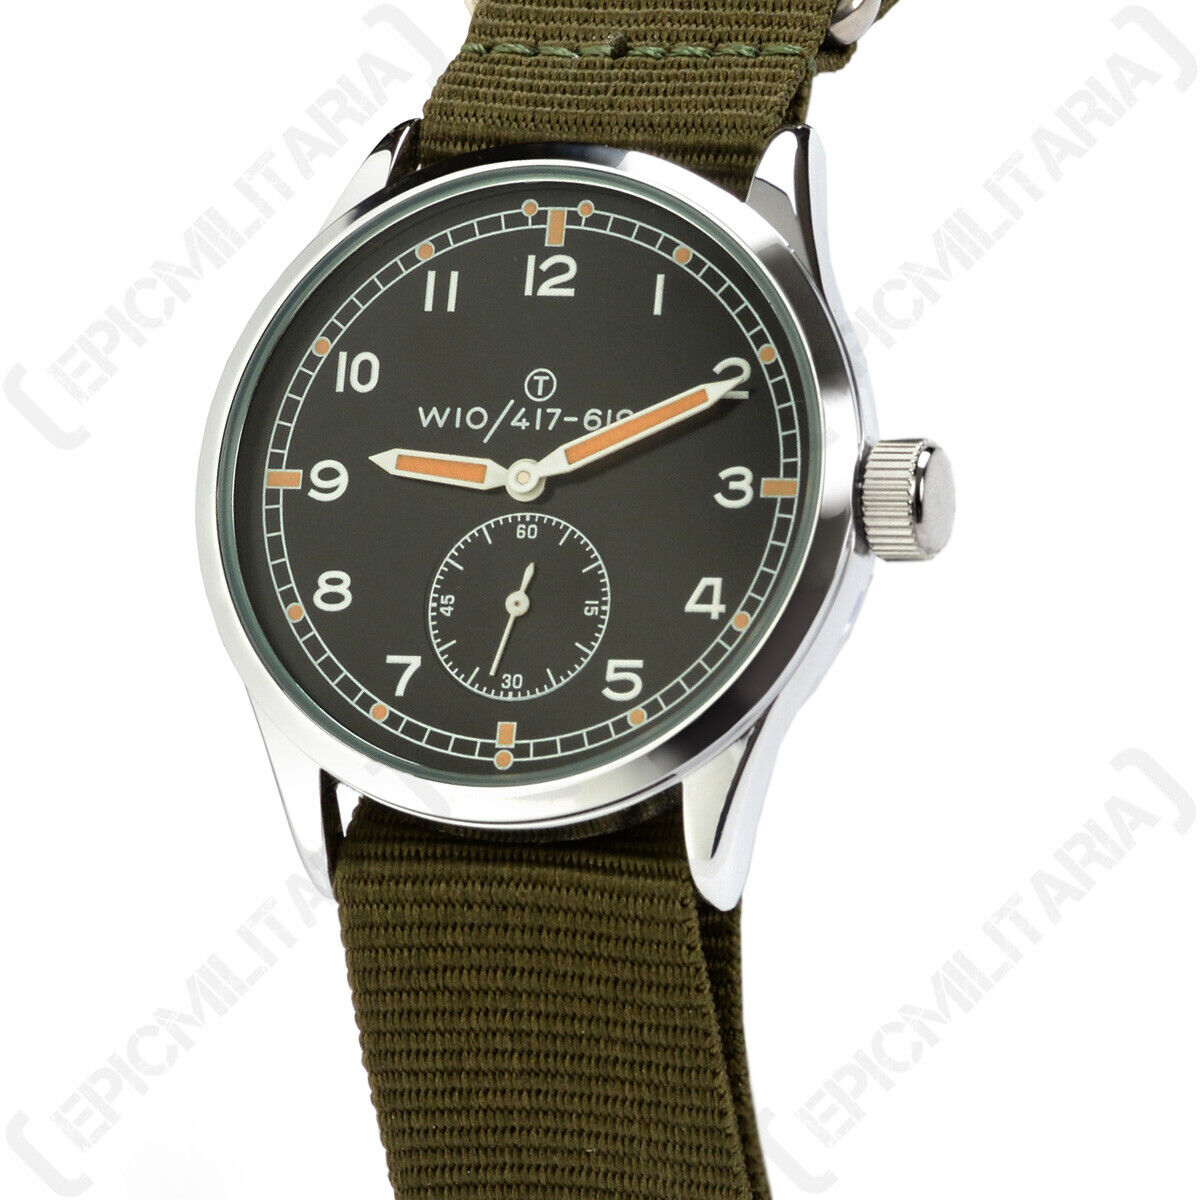 Ailager® Dirty Dozen British Military WW2 Service Watch - Luminous Hands - Repro